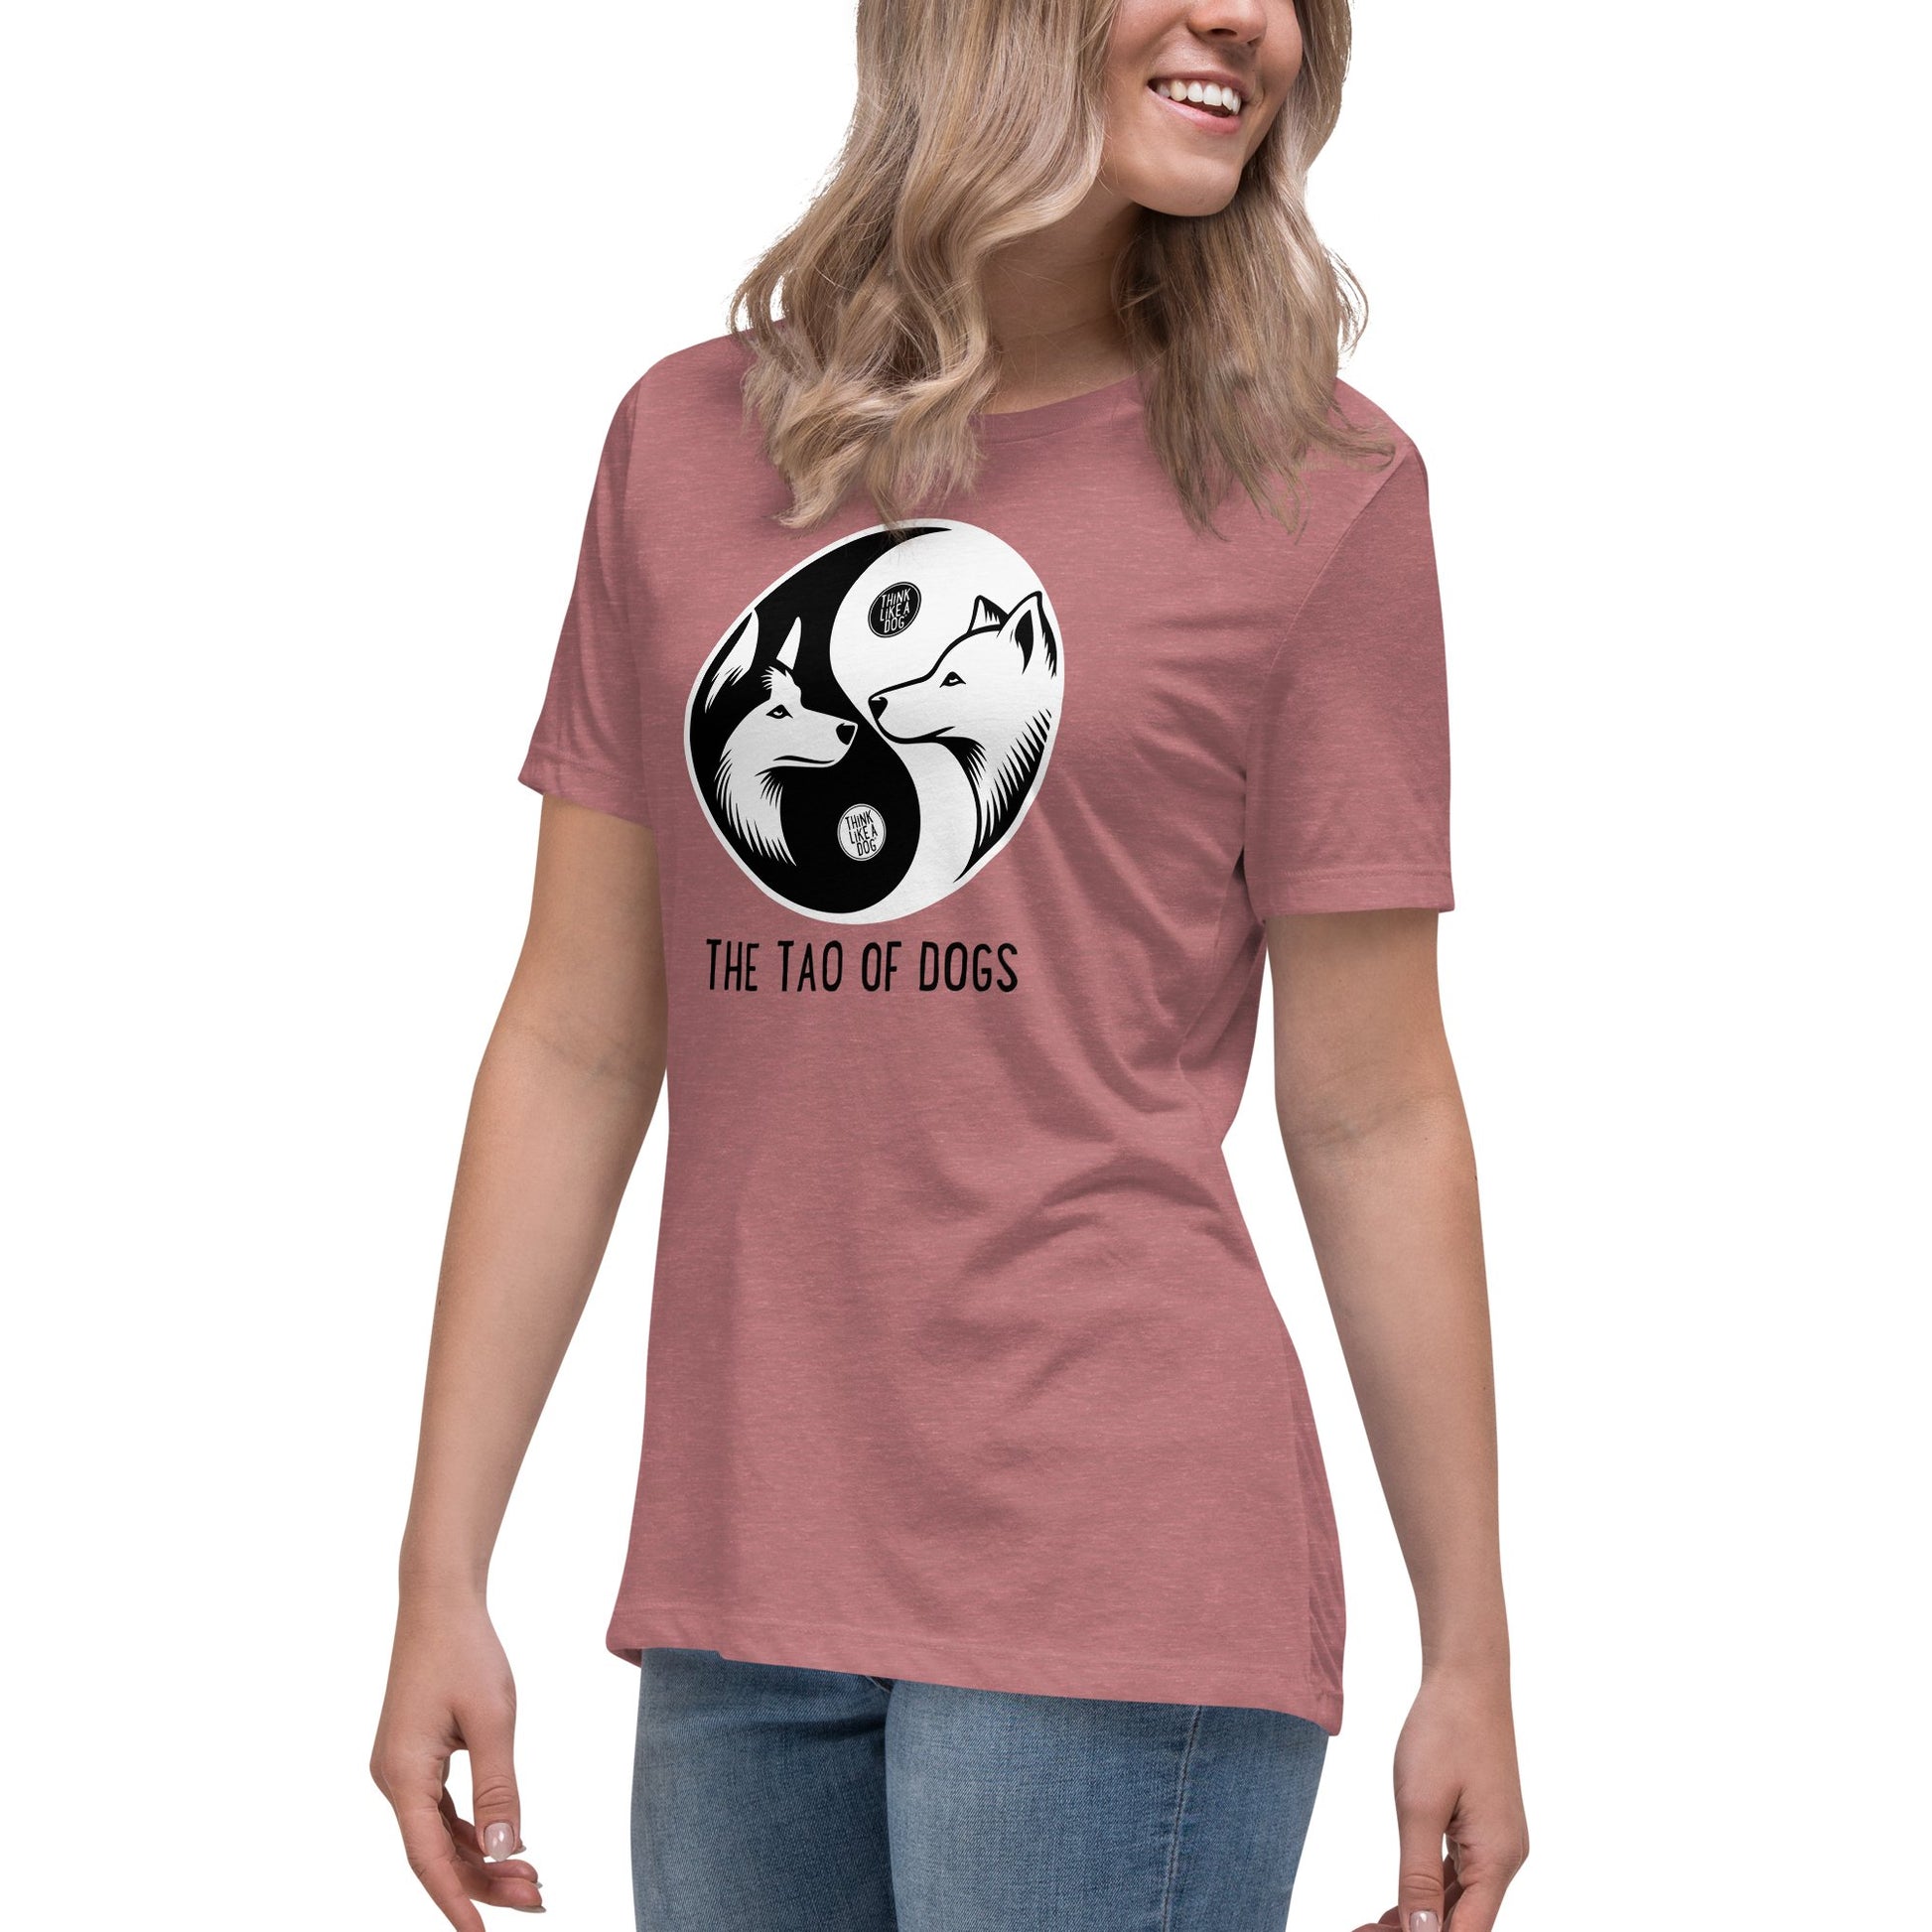 Women's Relaxed T-Shirt The Tao Of Dogs - THiNK LiKE A DOG®